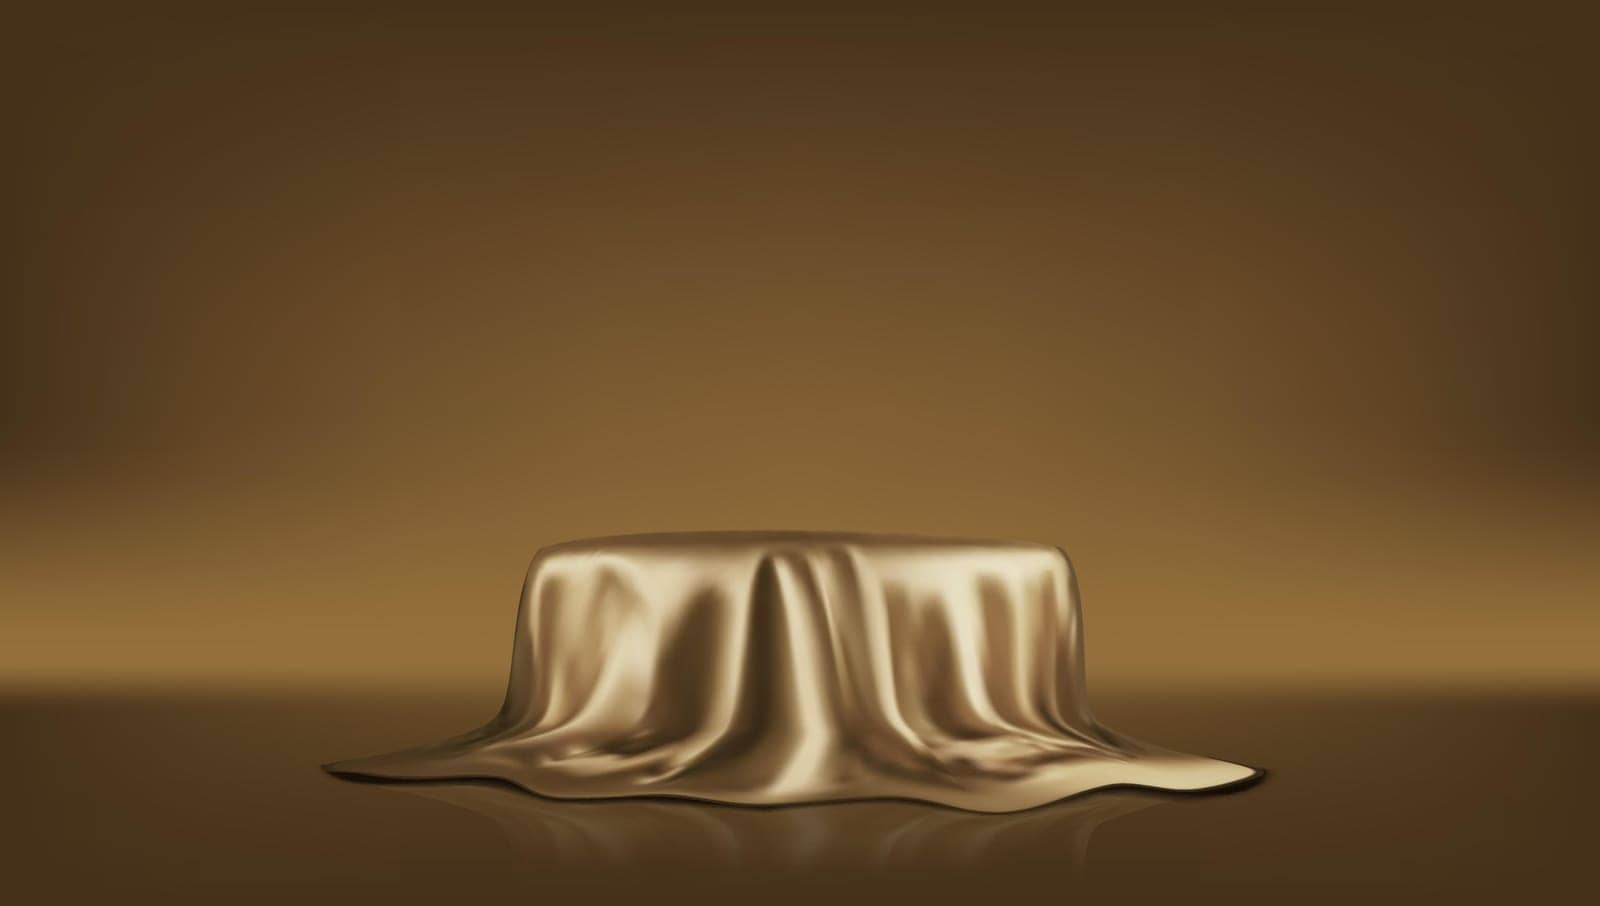 3D Round Product Podium Display Covered Golden Fabric Drapery. EPS10 Vector